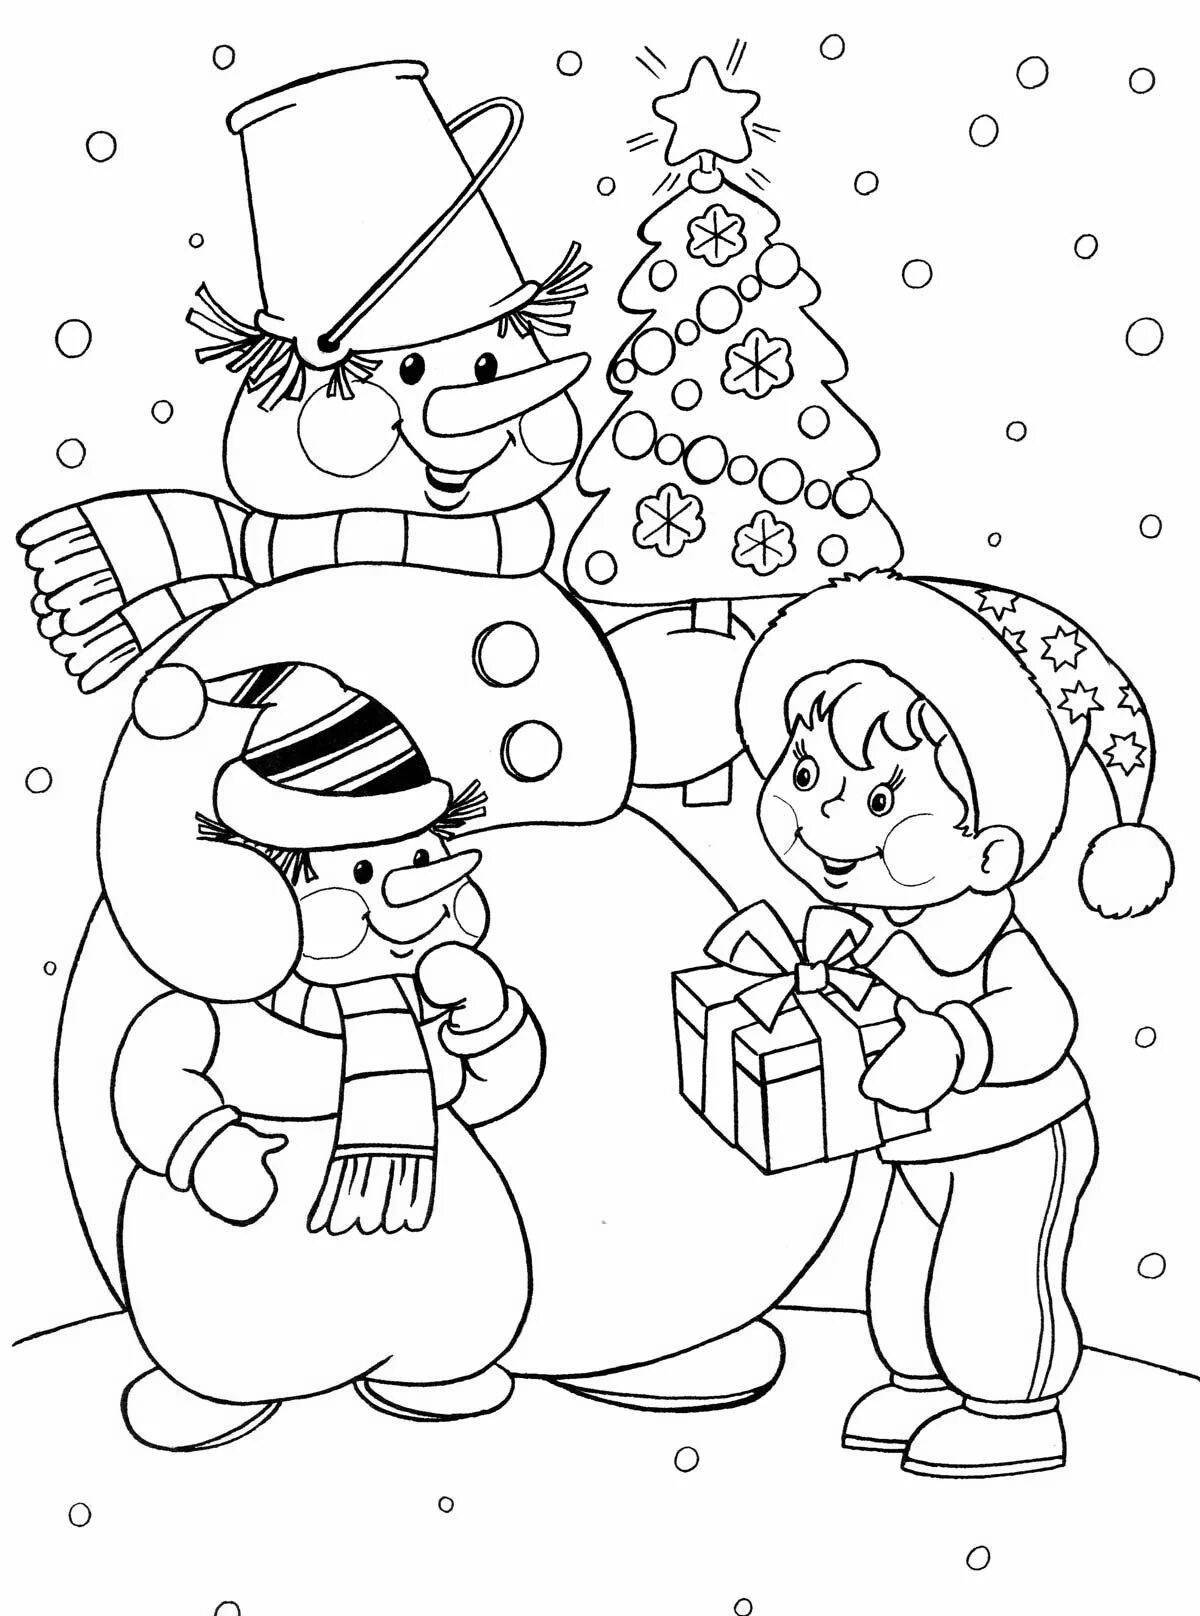 Great Christmas coloring book for kids